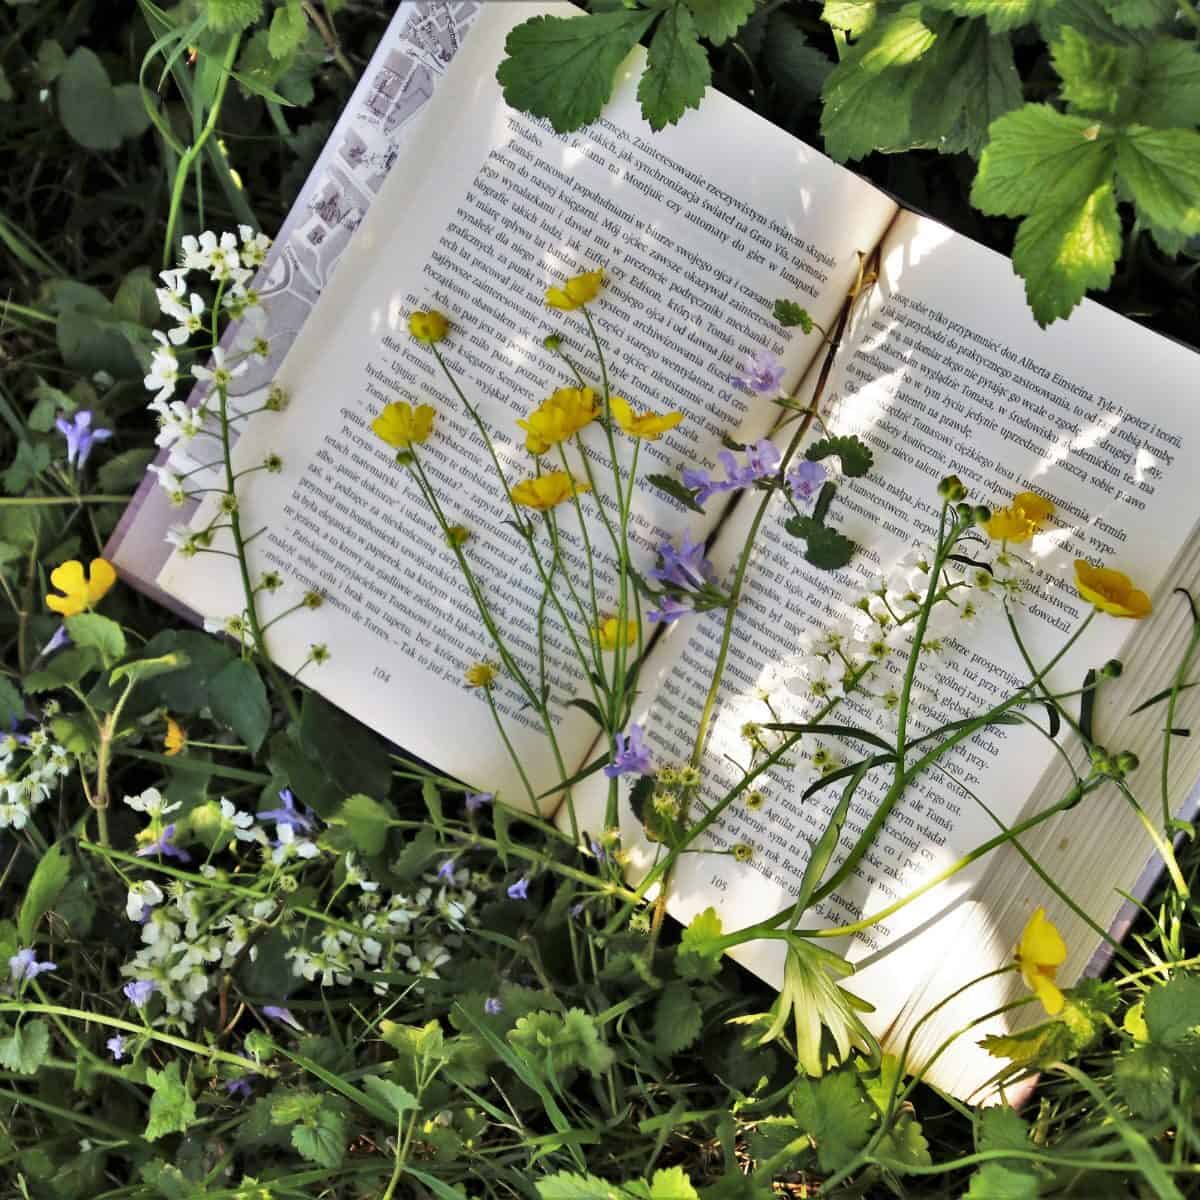 book in grass with flowers.